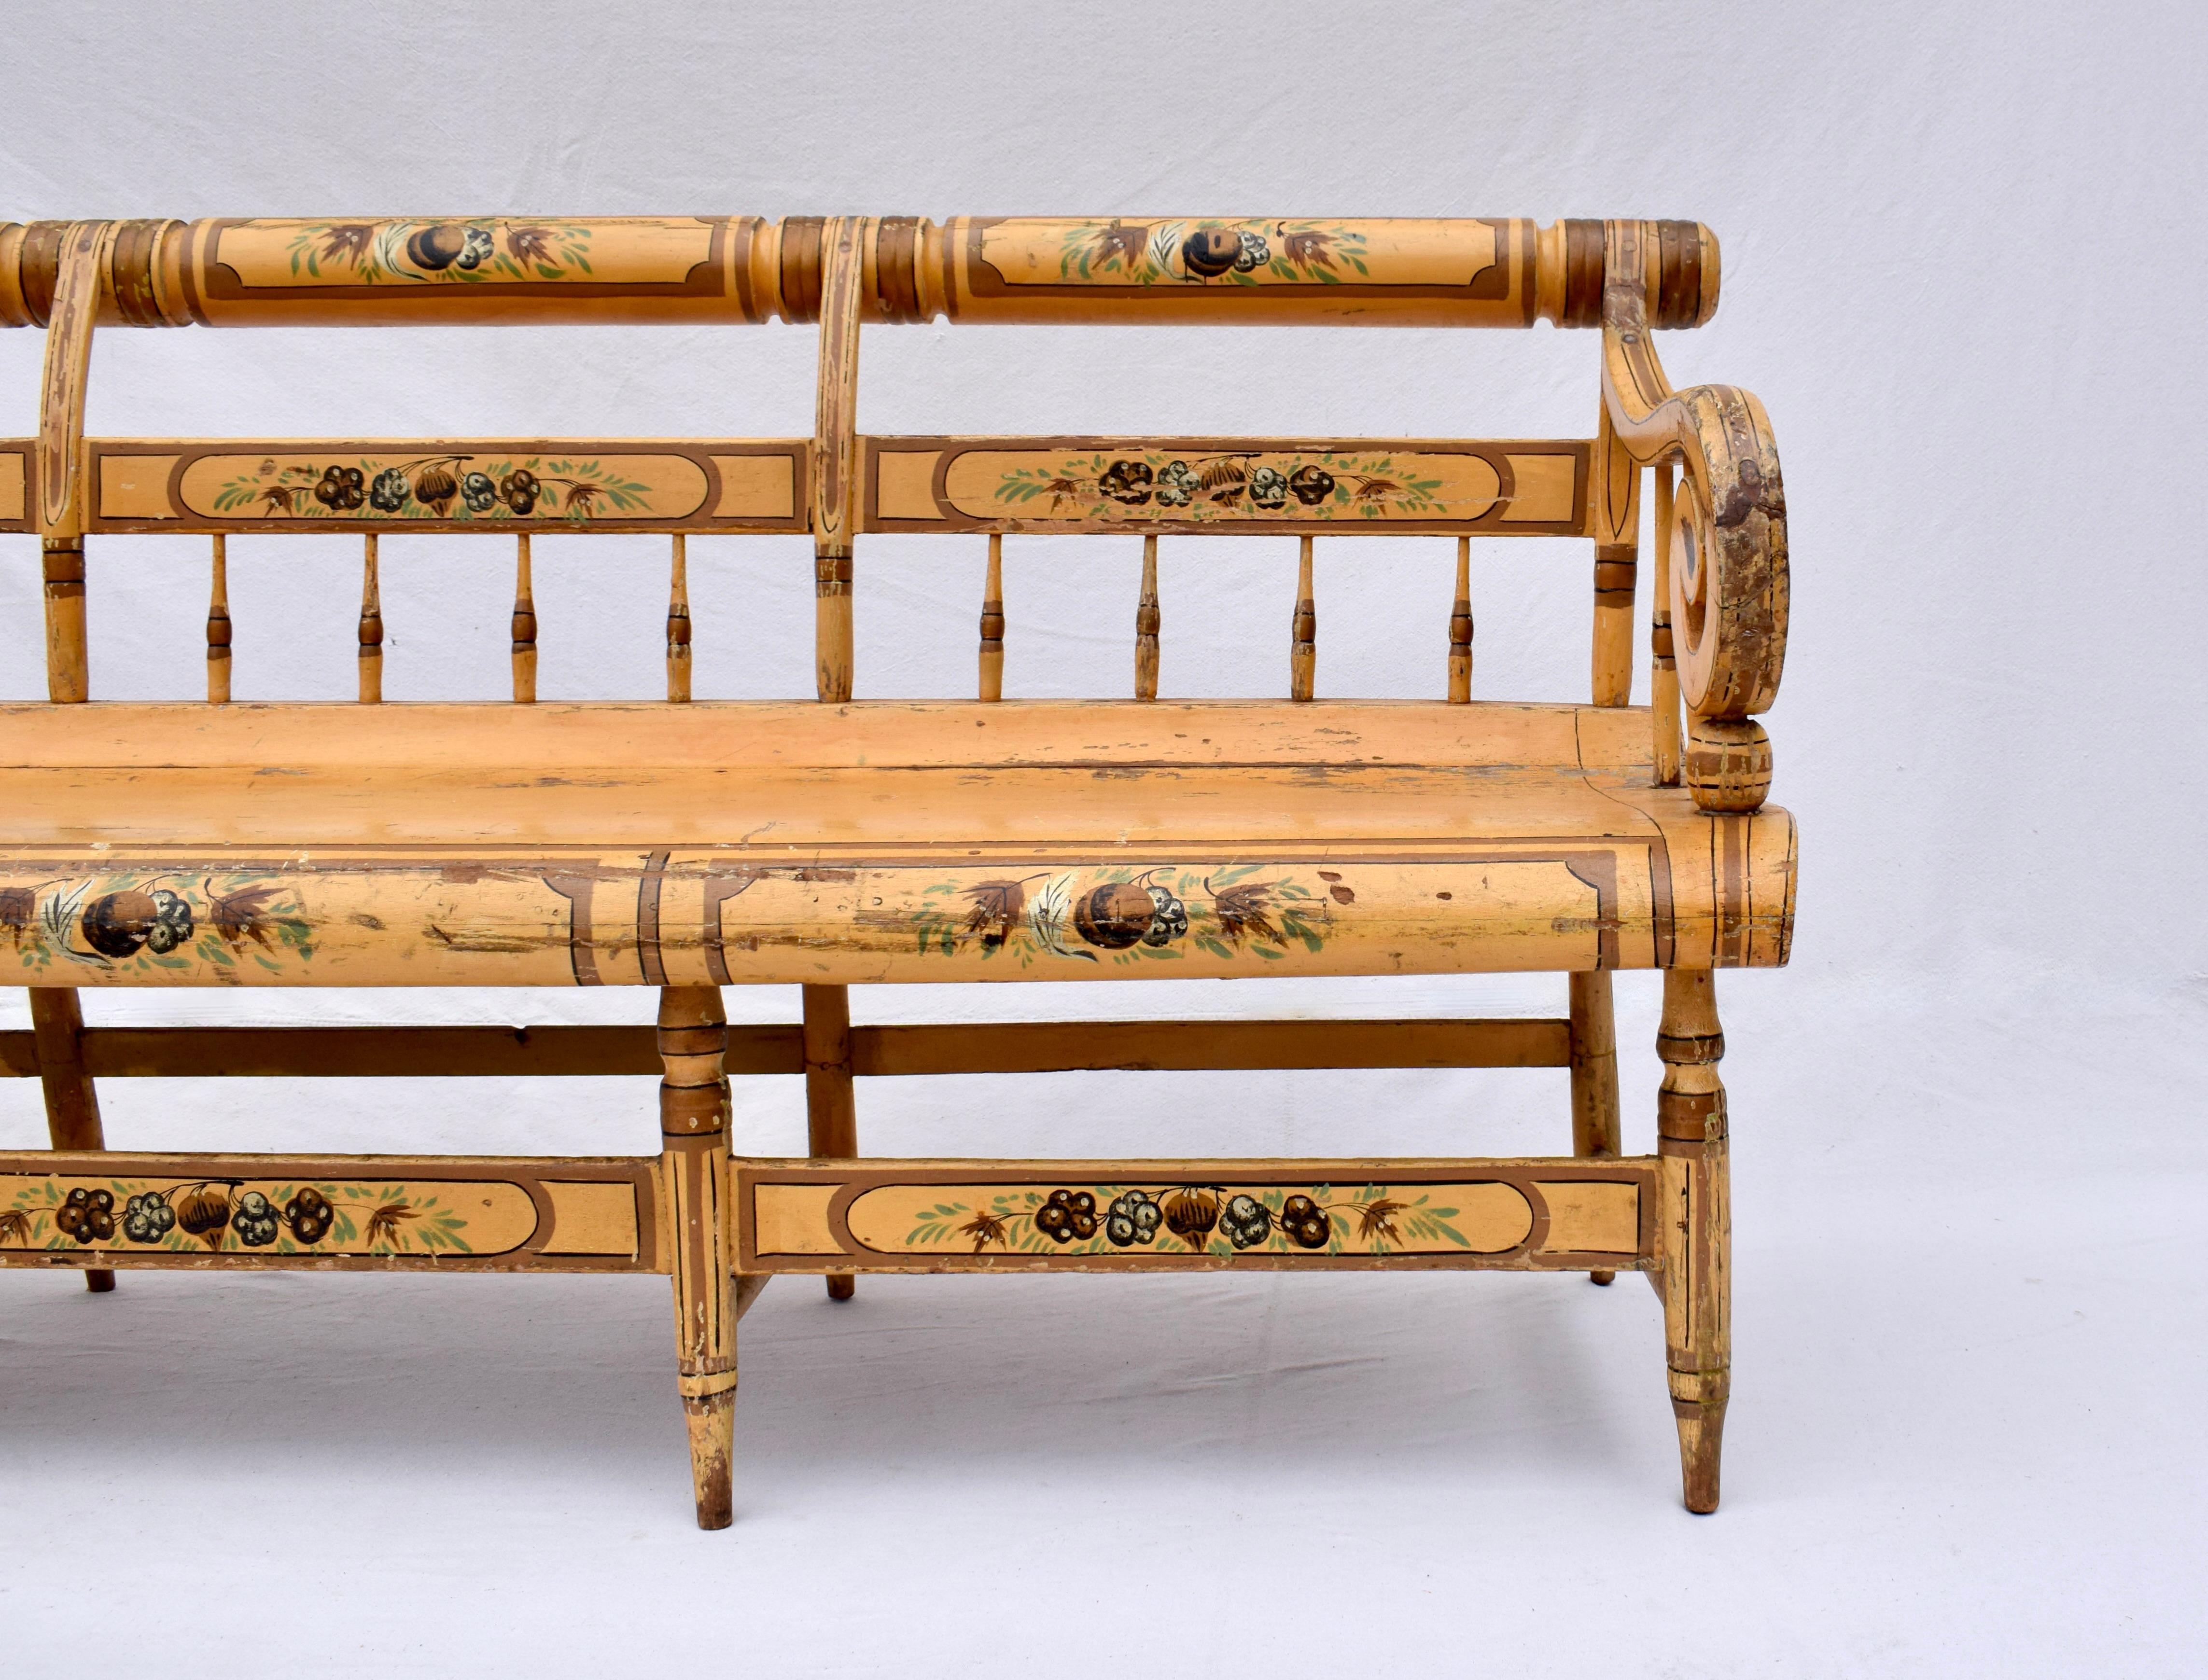 19th Century 19th C. American Federal Floral Painted Bench For Sale